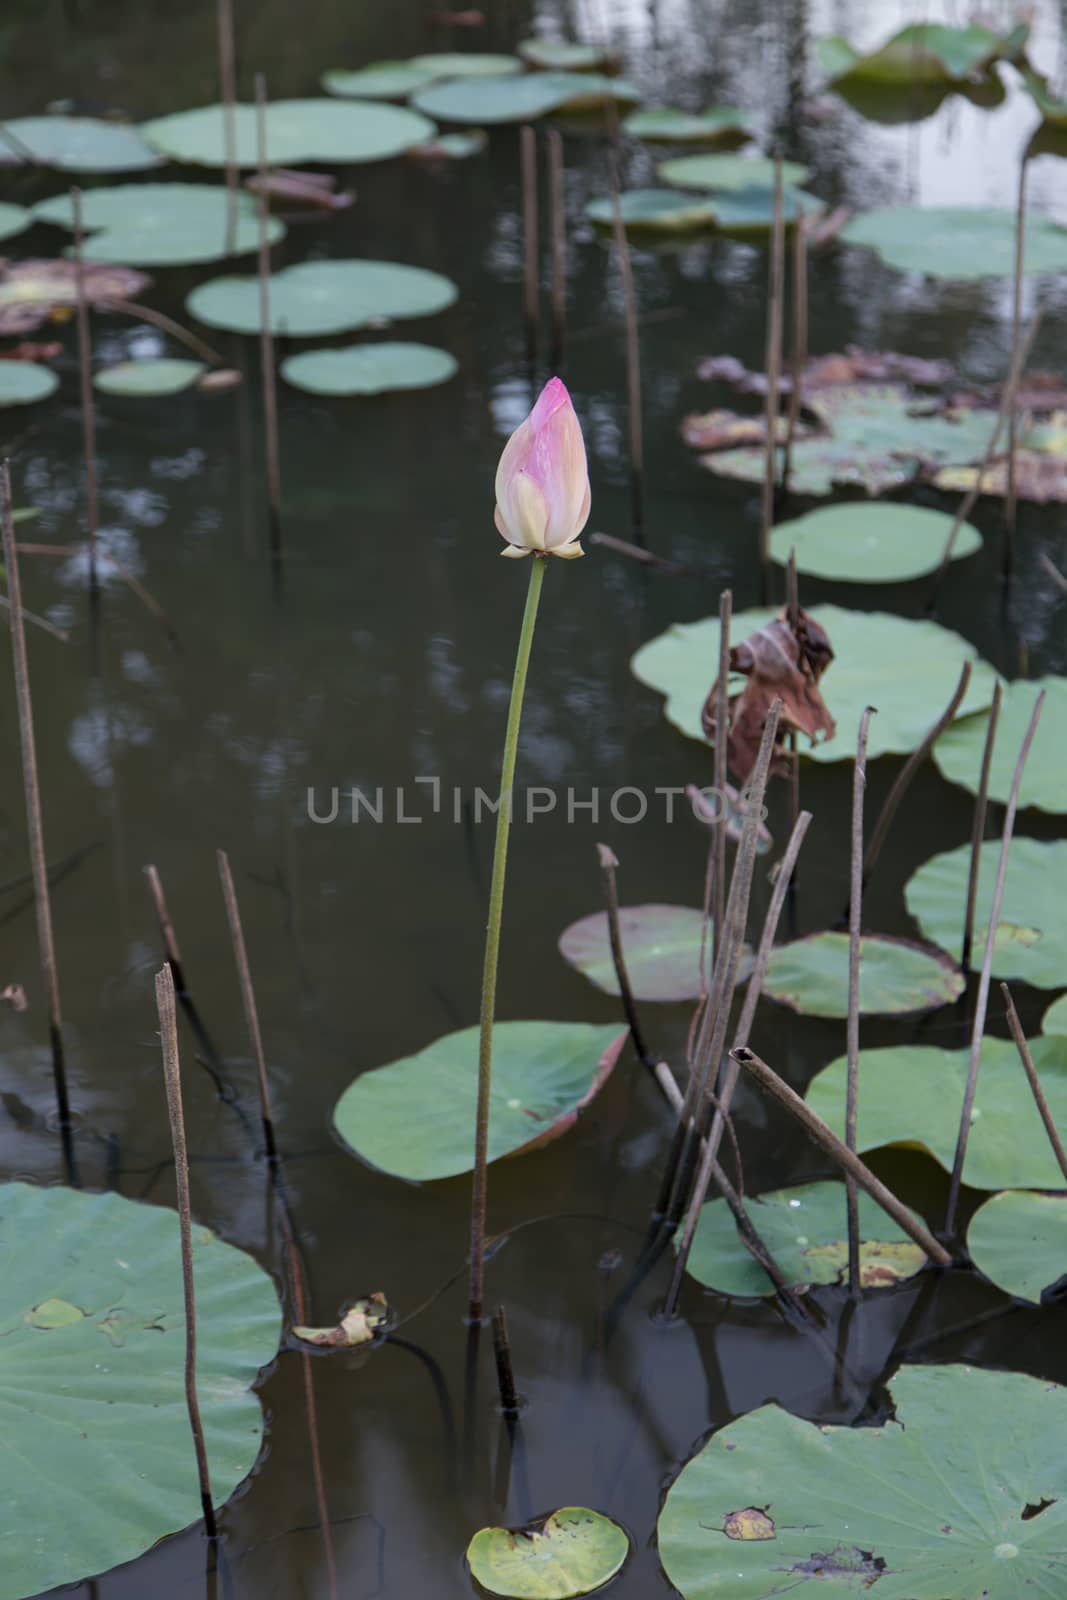 Lotus in water by ngarare